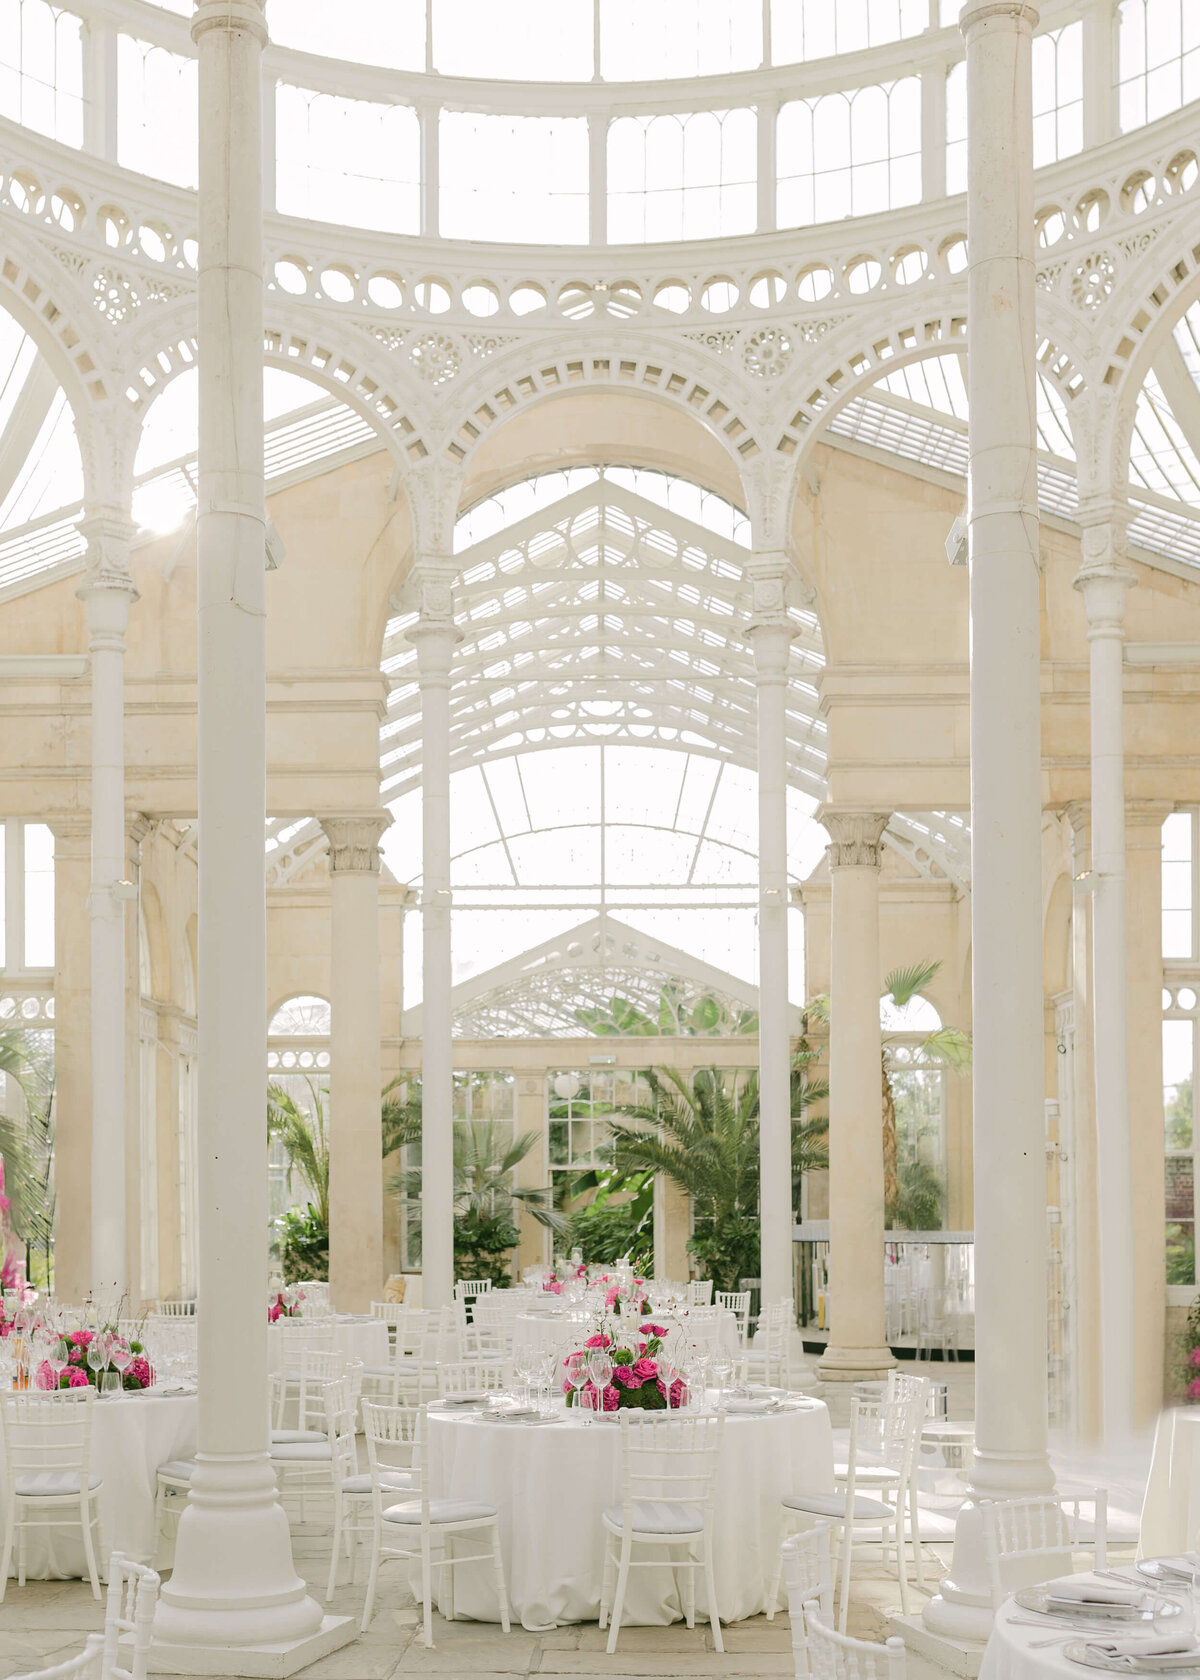 chloe-winstanley-weddings-syon-park-conservatory-tablescapes-dinner